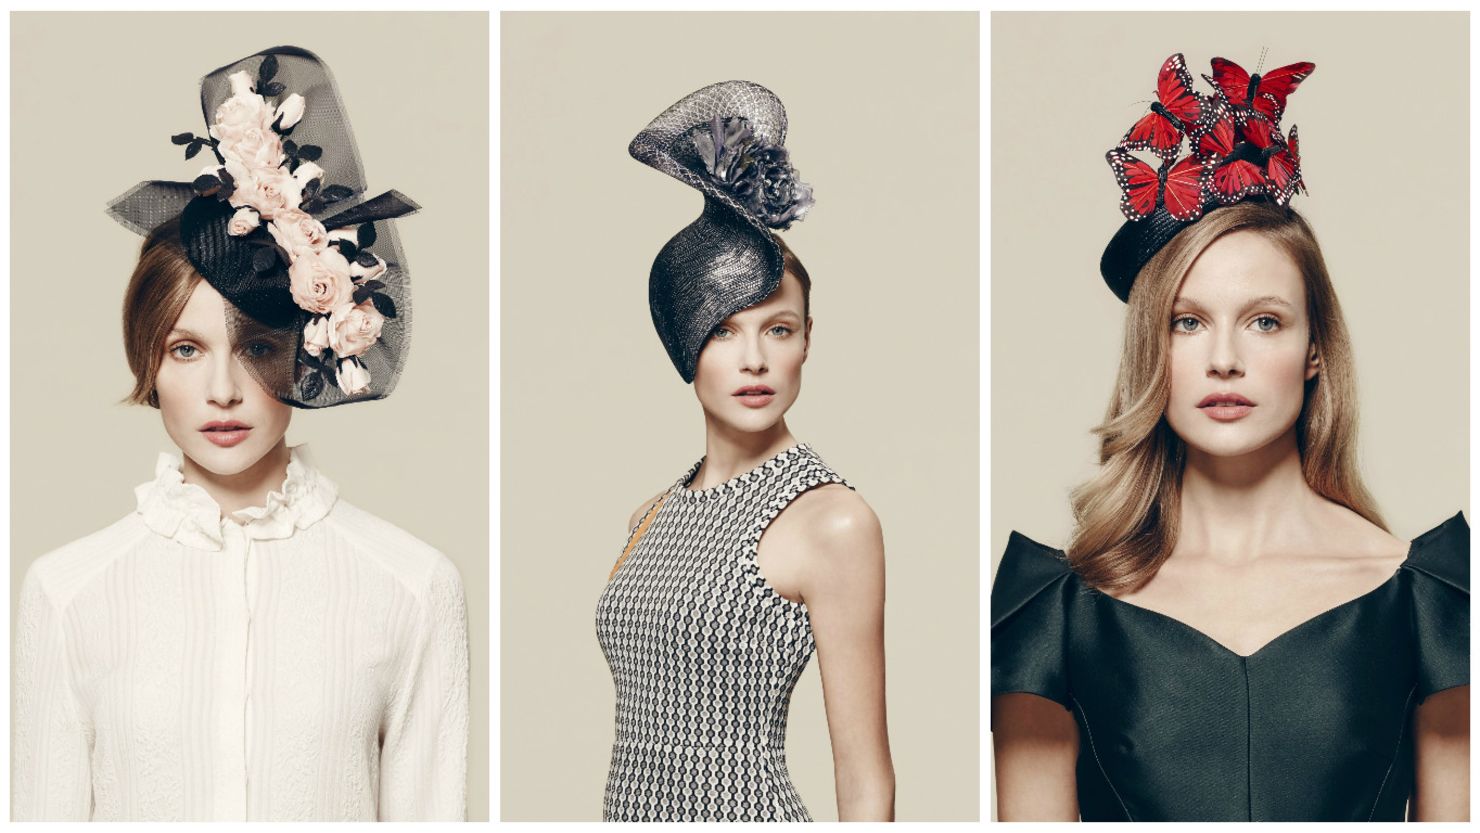 Britian's famous horse race, Royal Ascot, asked eight top milliners to design their ultimate hats.